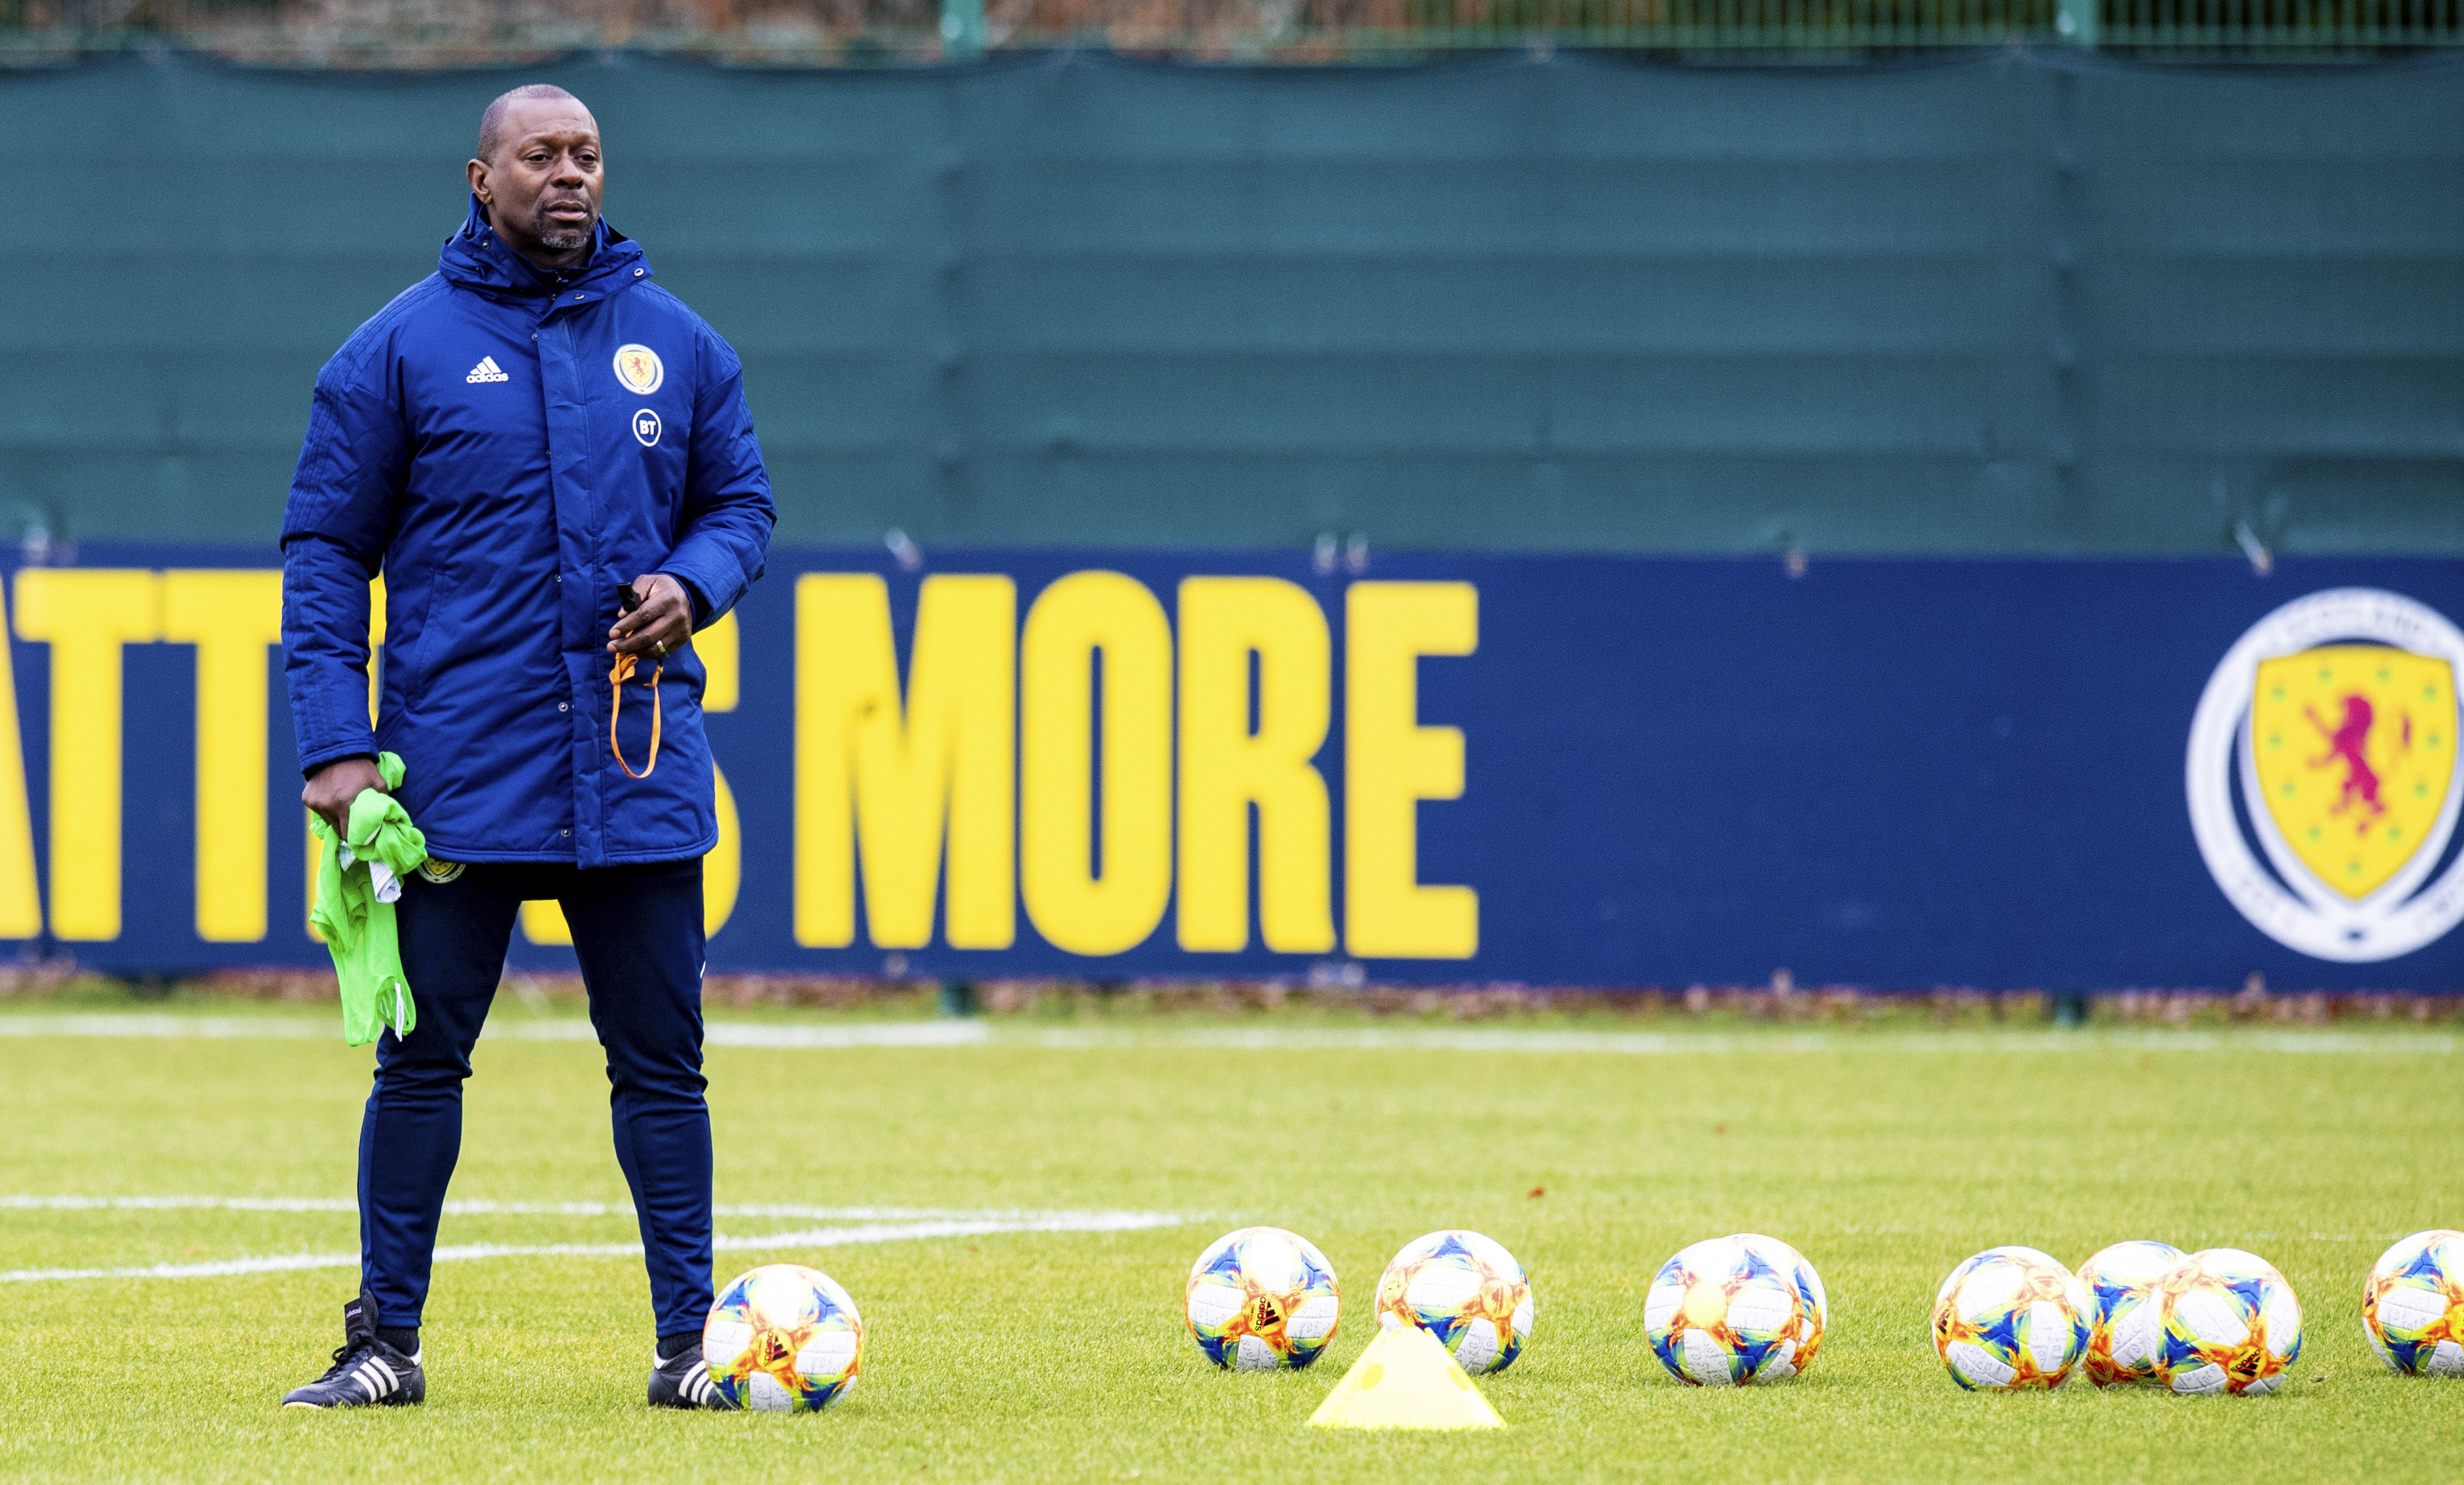 Scotland assistant coach Alex Dyer during a training session at Oriam on November 12, 2019.